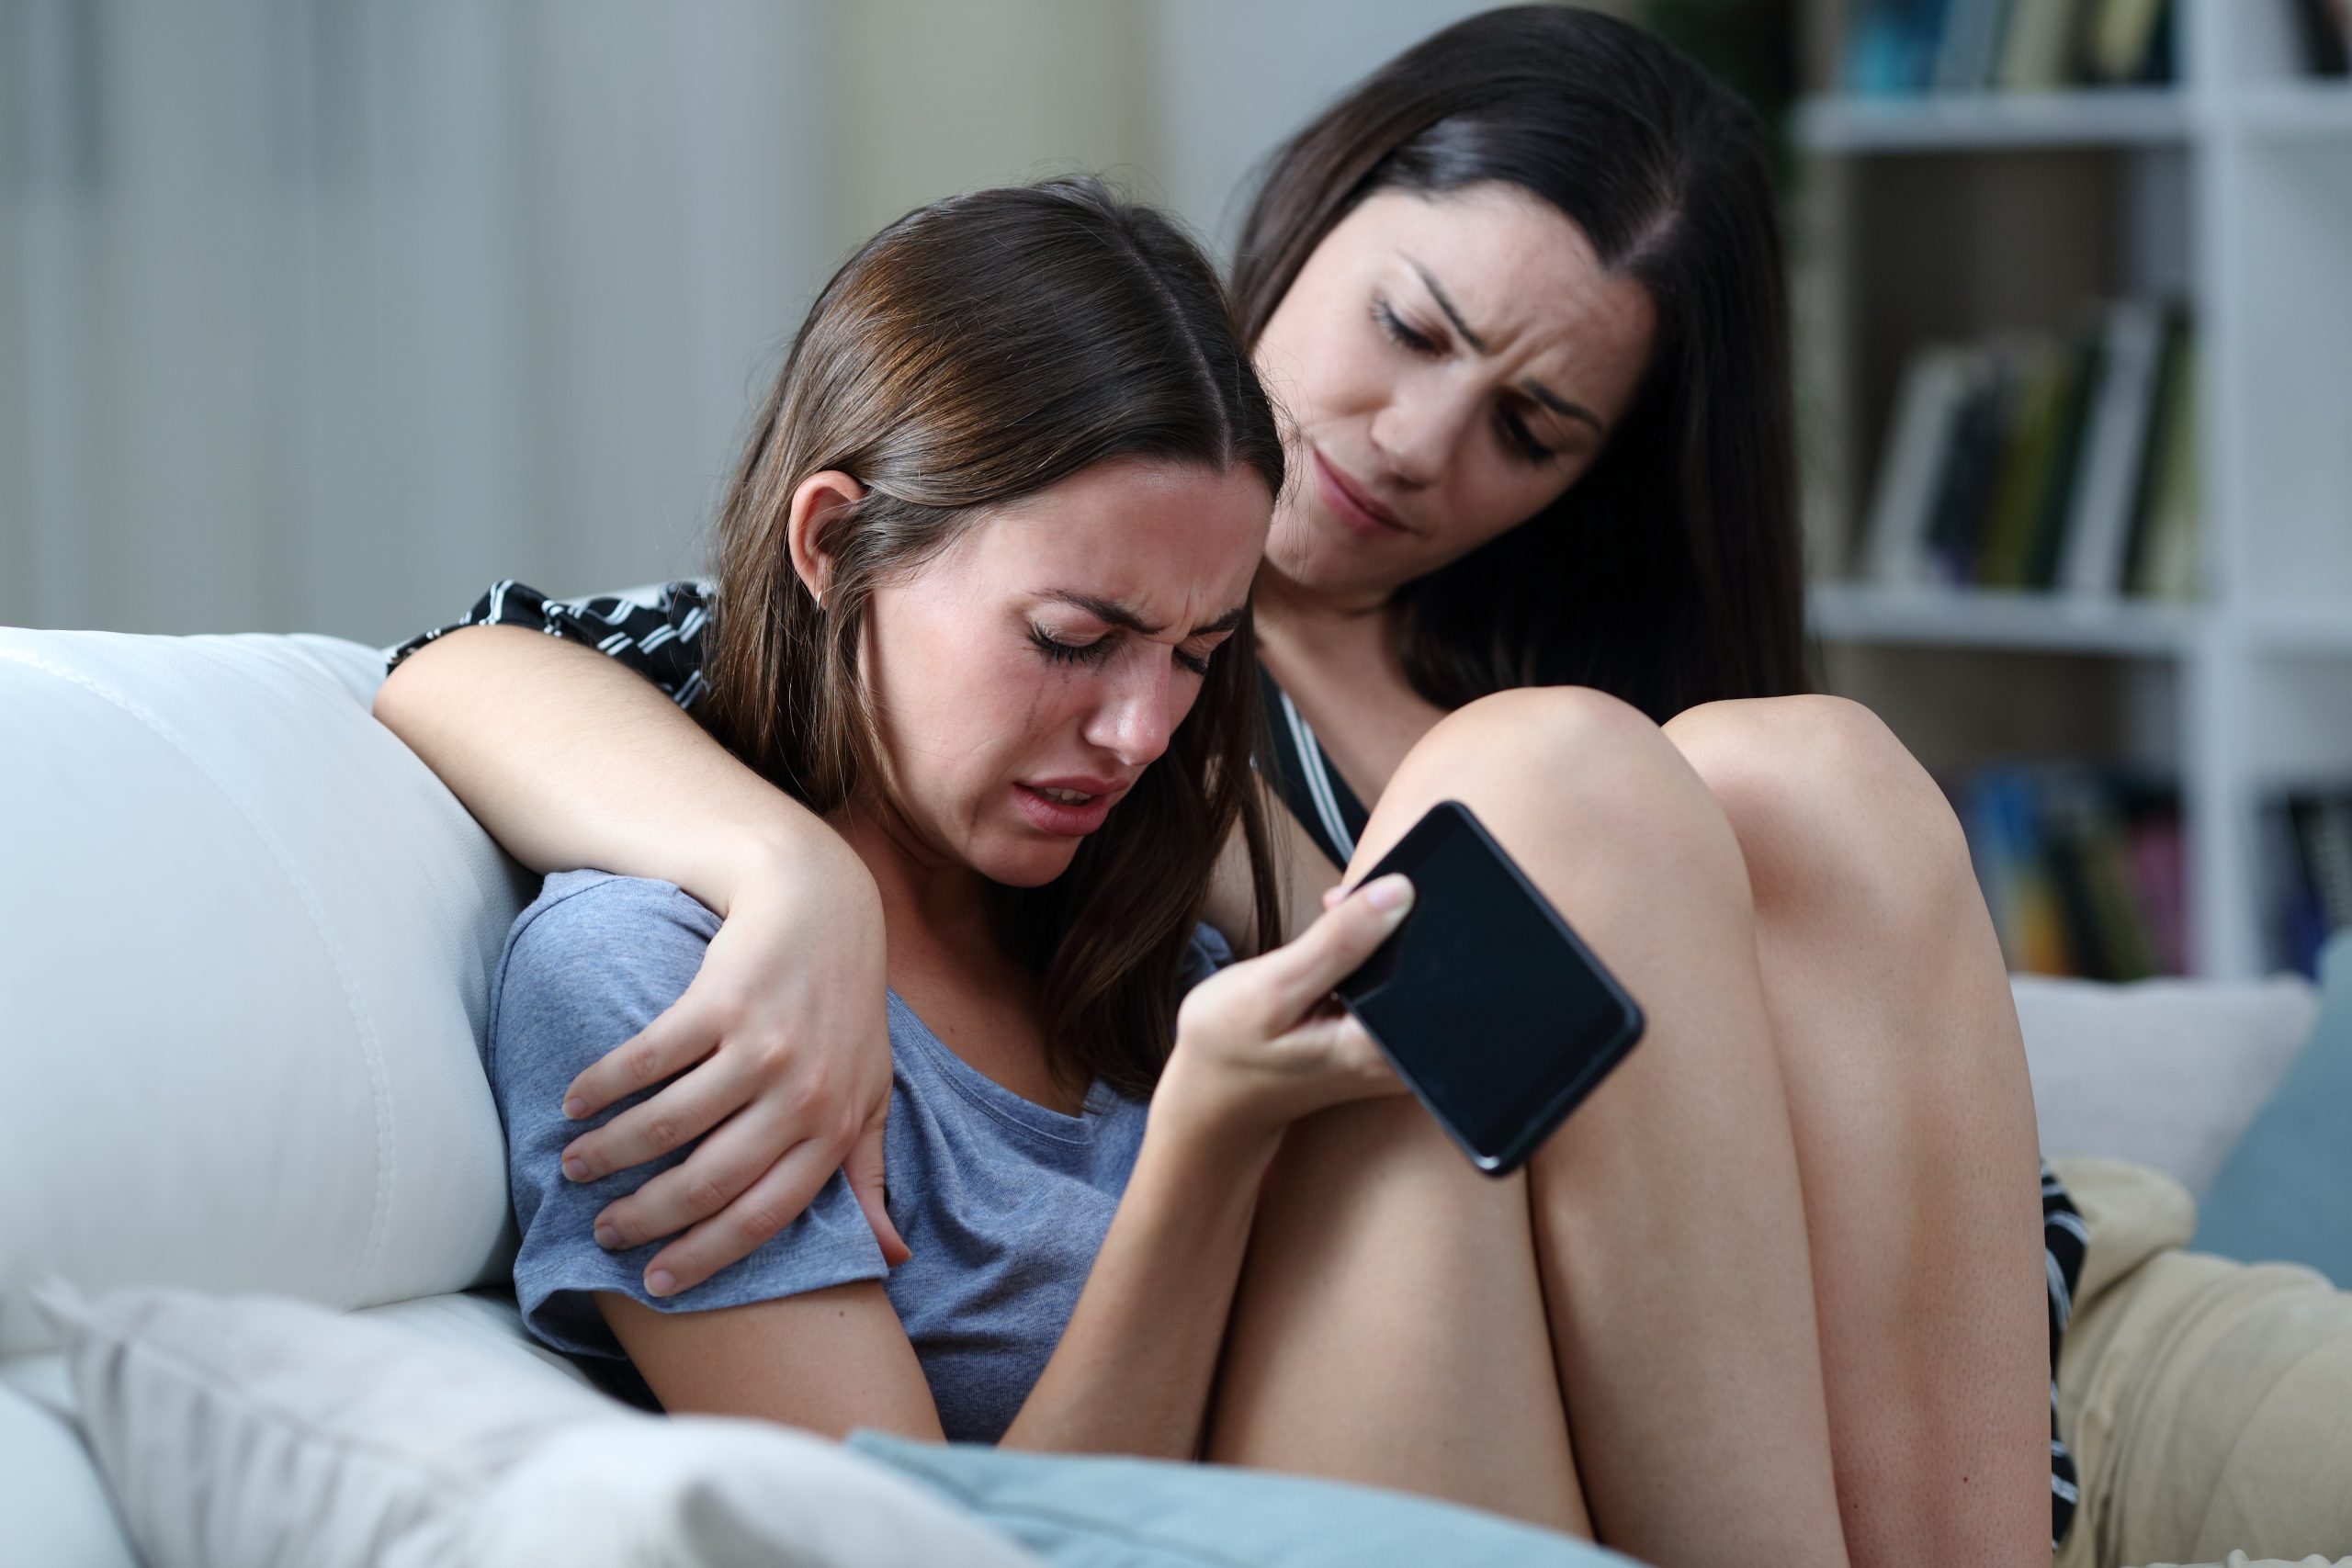 Sad teen with phone being comforted by her sister